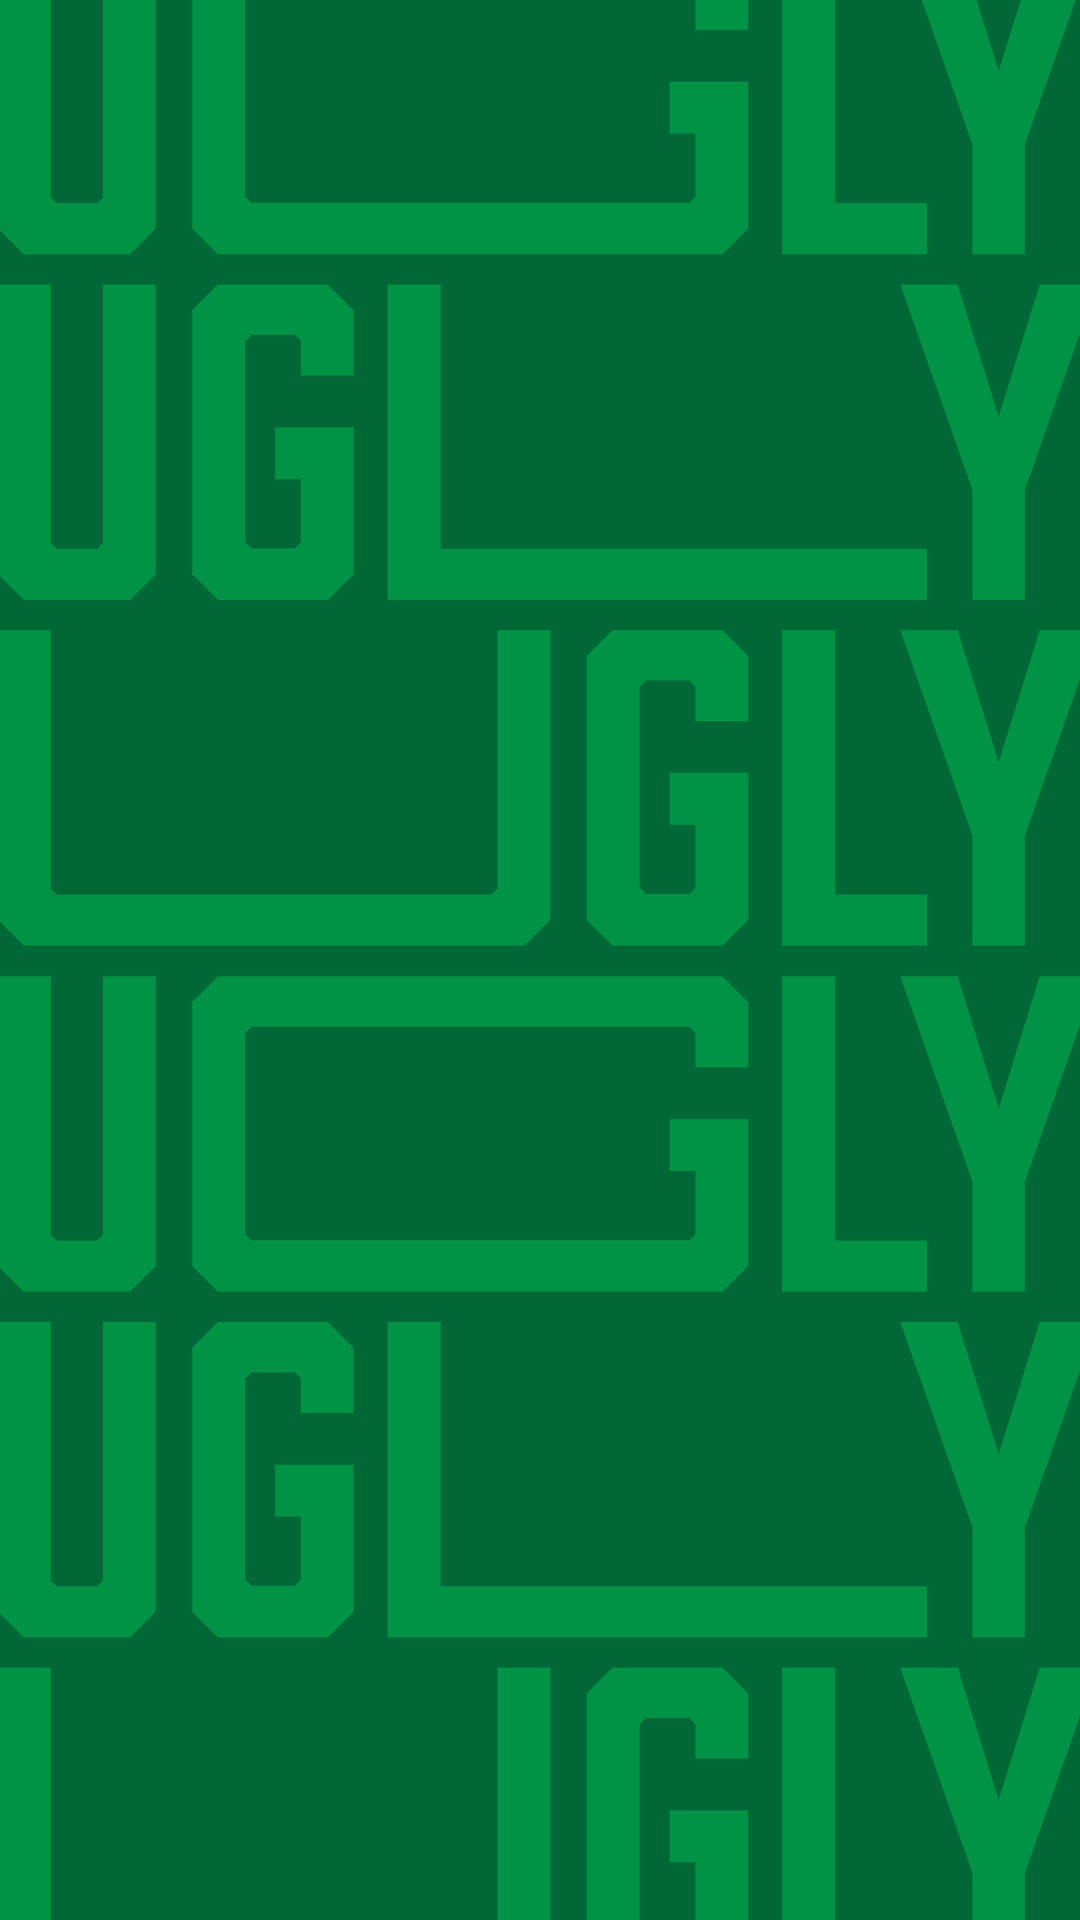 Ugly Green Typography Wallpaper